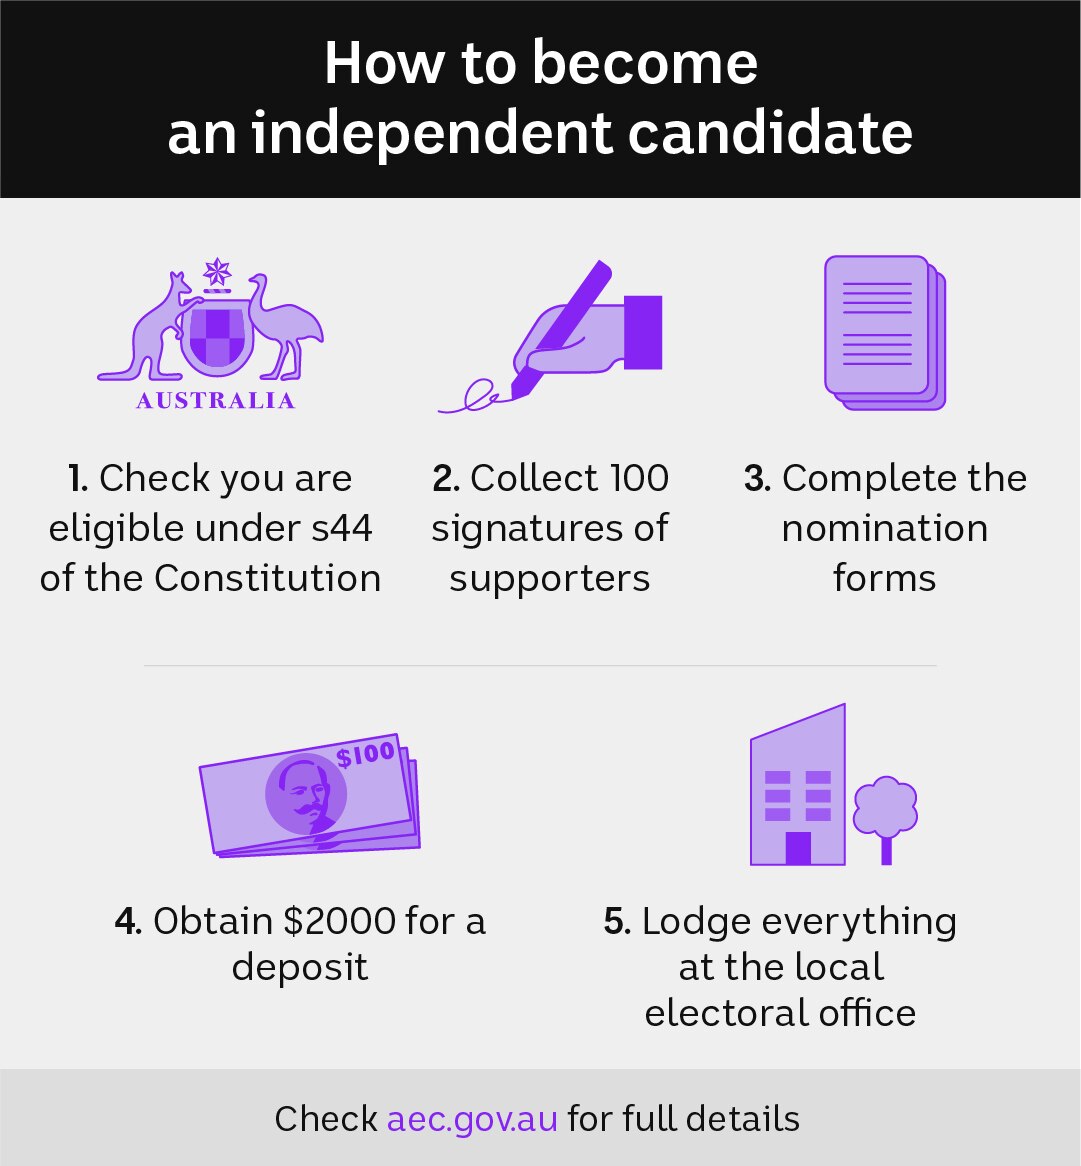 Infographic showing the steps needed to become an independent